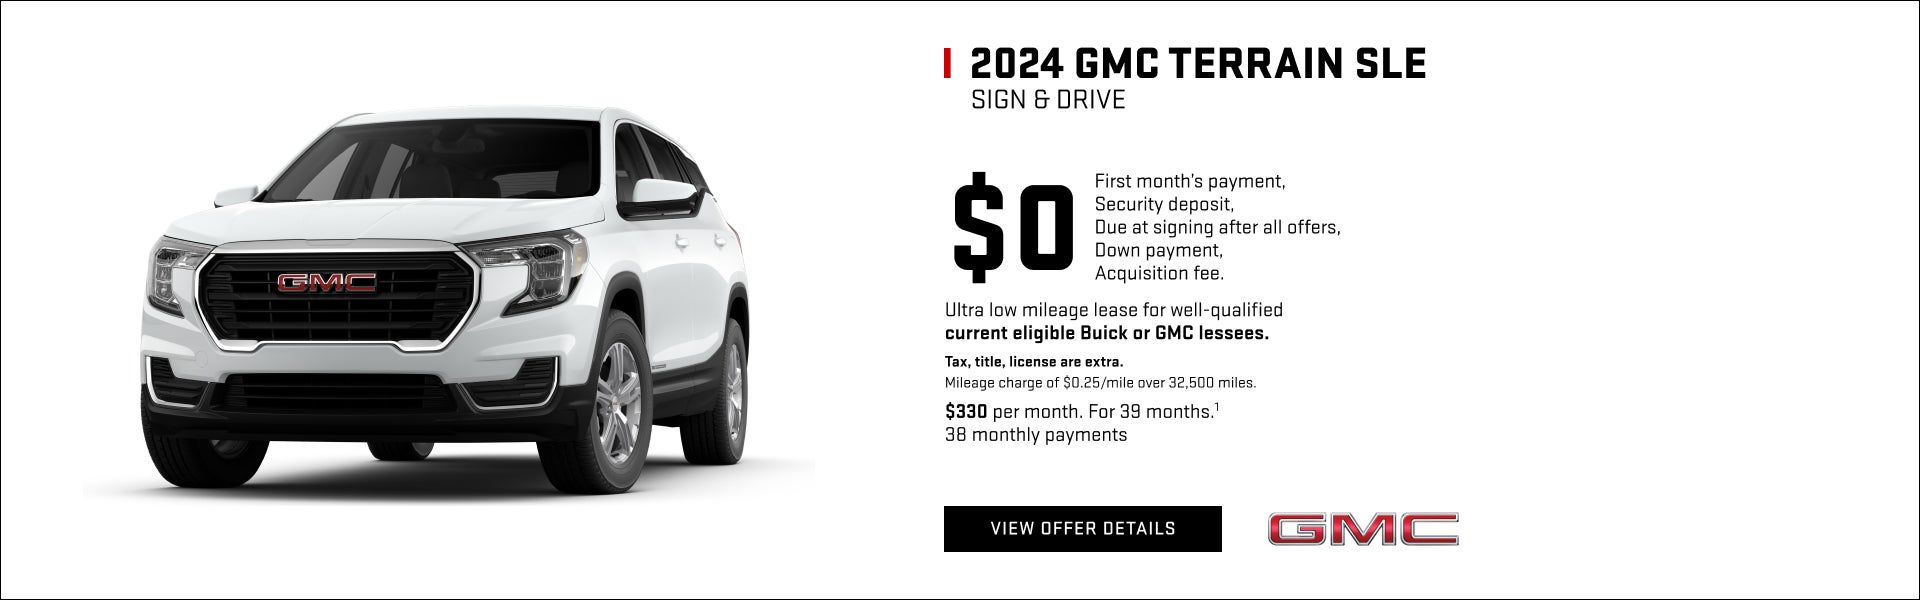 SIGN & DRIVE

$0
FIRST MONTH'S PAYMENT
SECURITY DEPOSIT
DUE AT LEASE SIGNING AFTER ALL OFFERS
DOW...